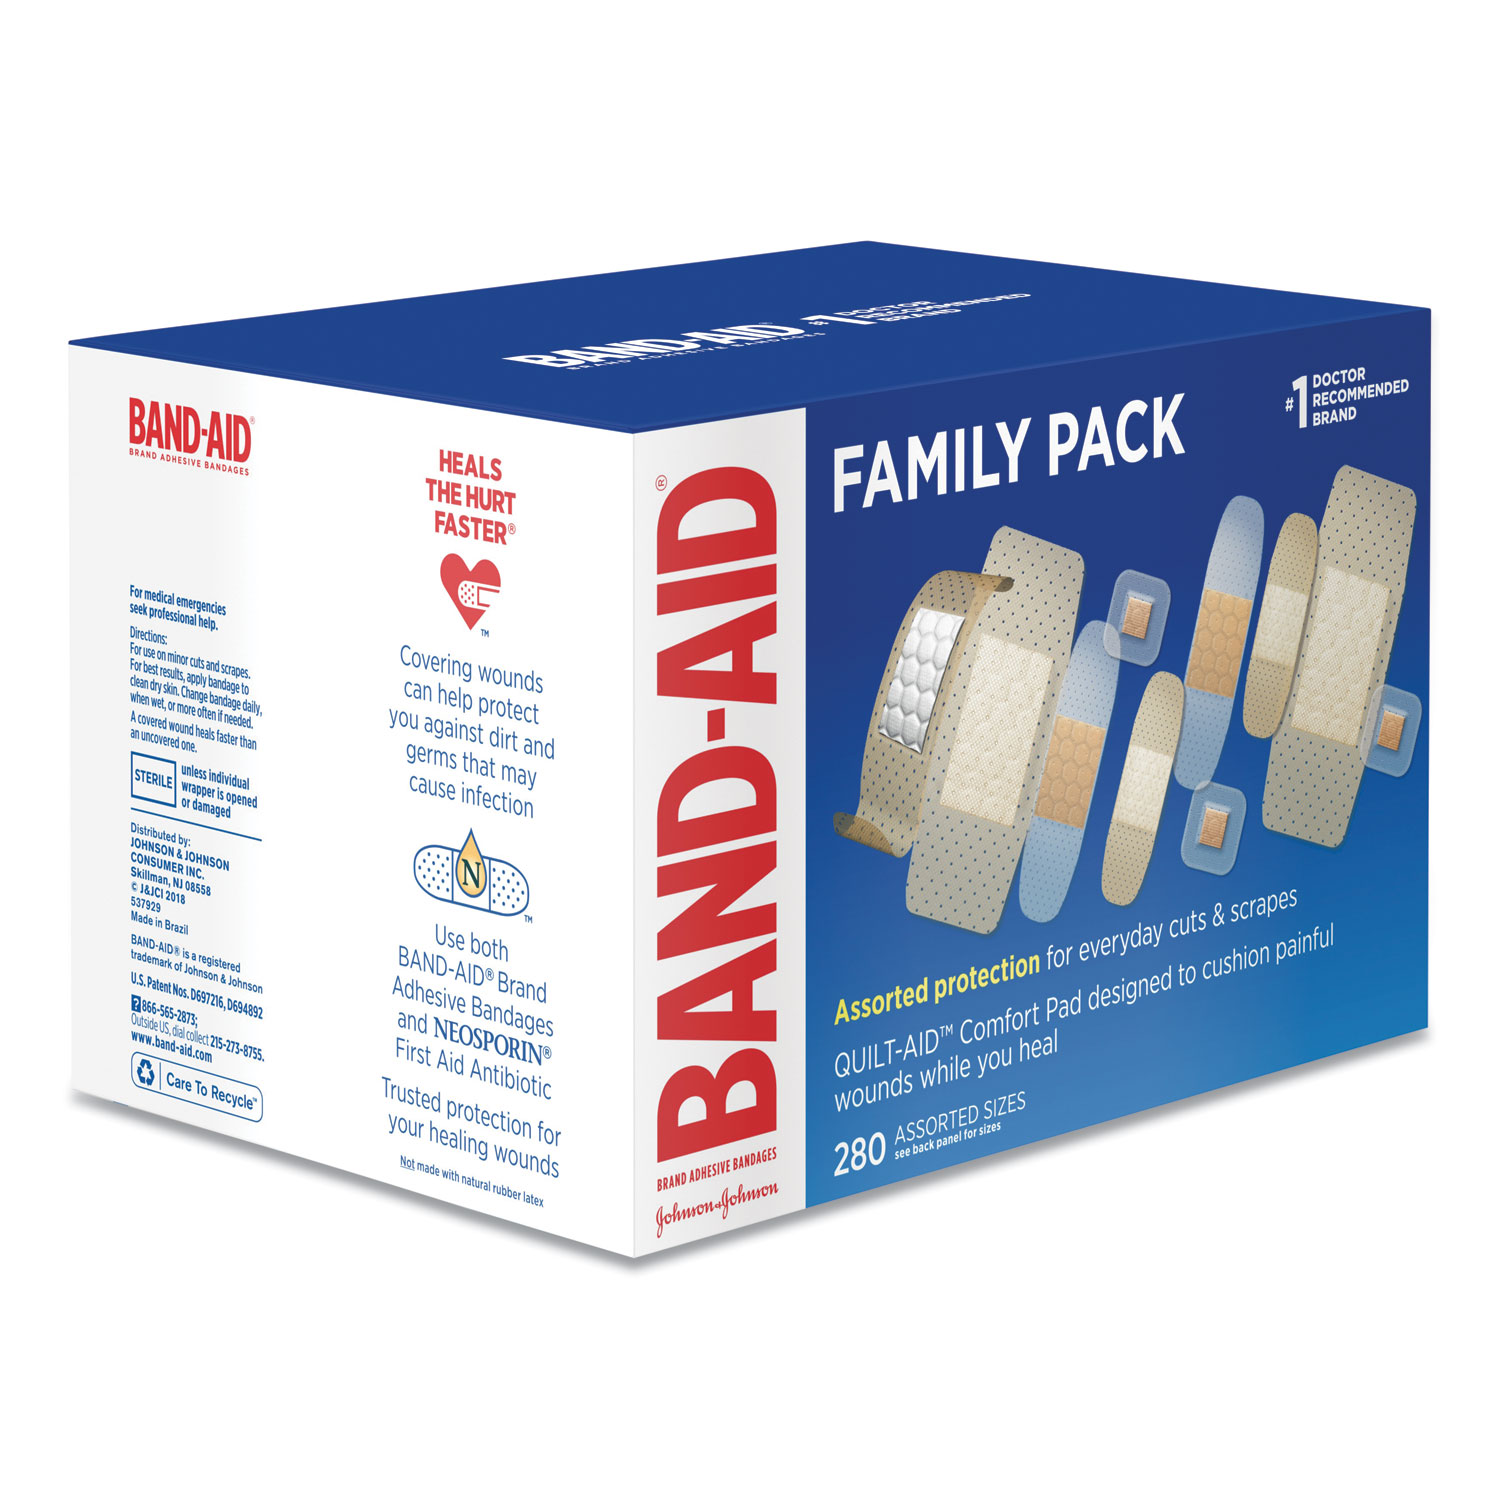 Band-Aid Brand Flexible Fabric Adhesive Bandages, Comfortable Sterile  Protection & Wound Care for Minor Cuts & Burns, Quilt-Aid Technology to  Cushion Painful Wounds, Assorted Sizes, 30 Ct, Bandages